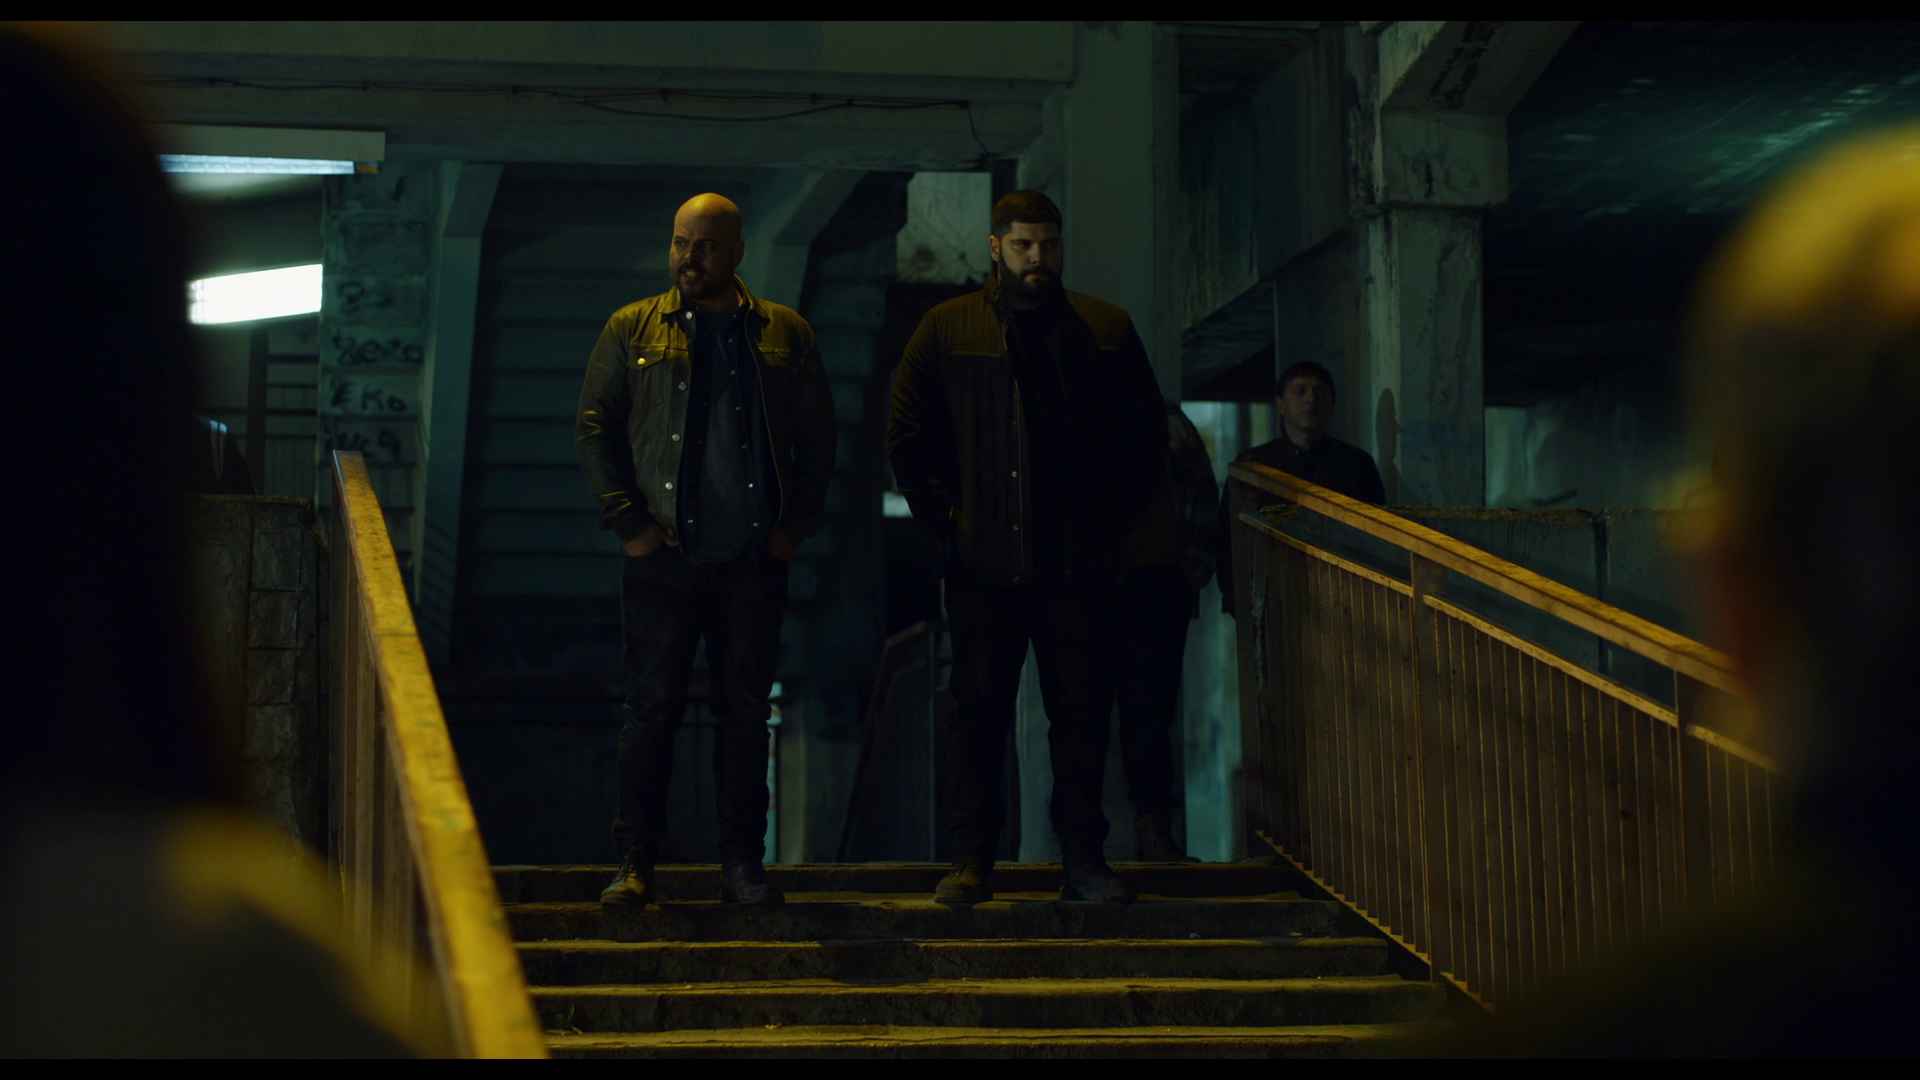 Events From Previous Episode That May Affect Gomorra Season 5 Episode 11